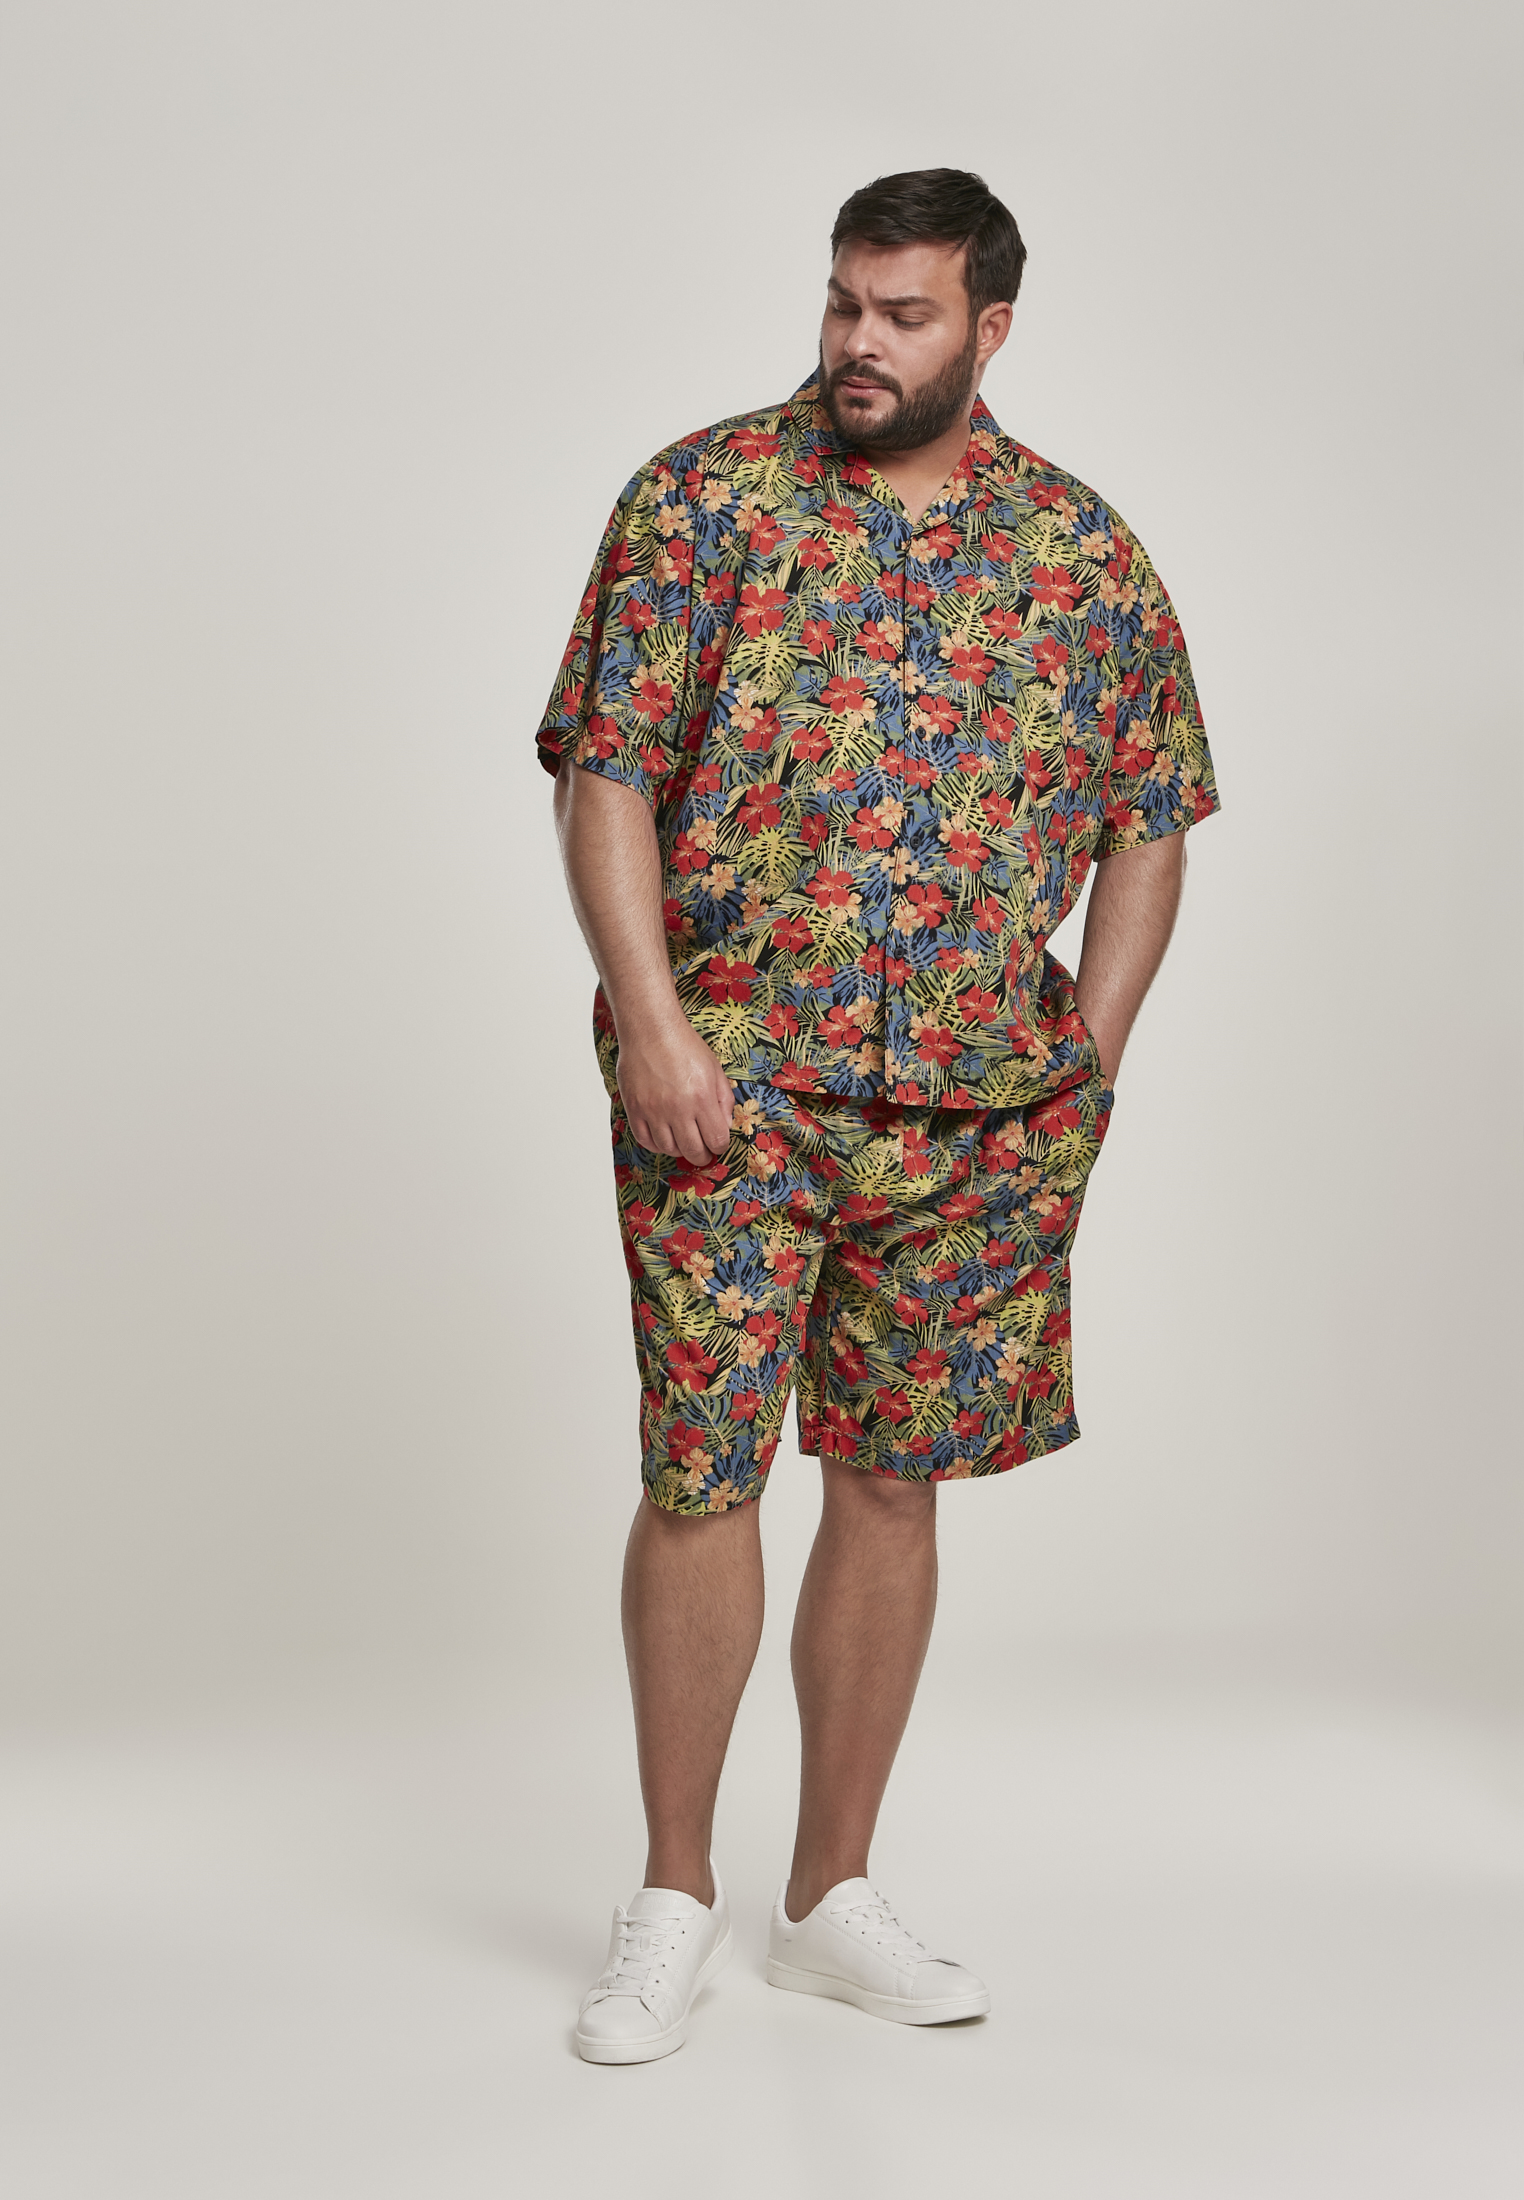 Plus Size Pattern Resort Shorts in Farbe black/tropical